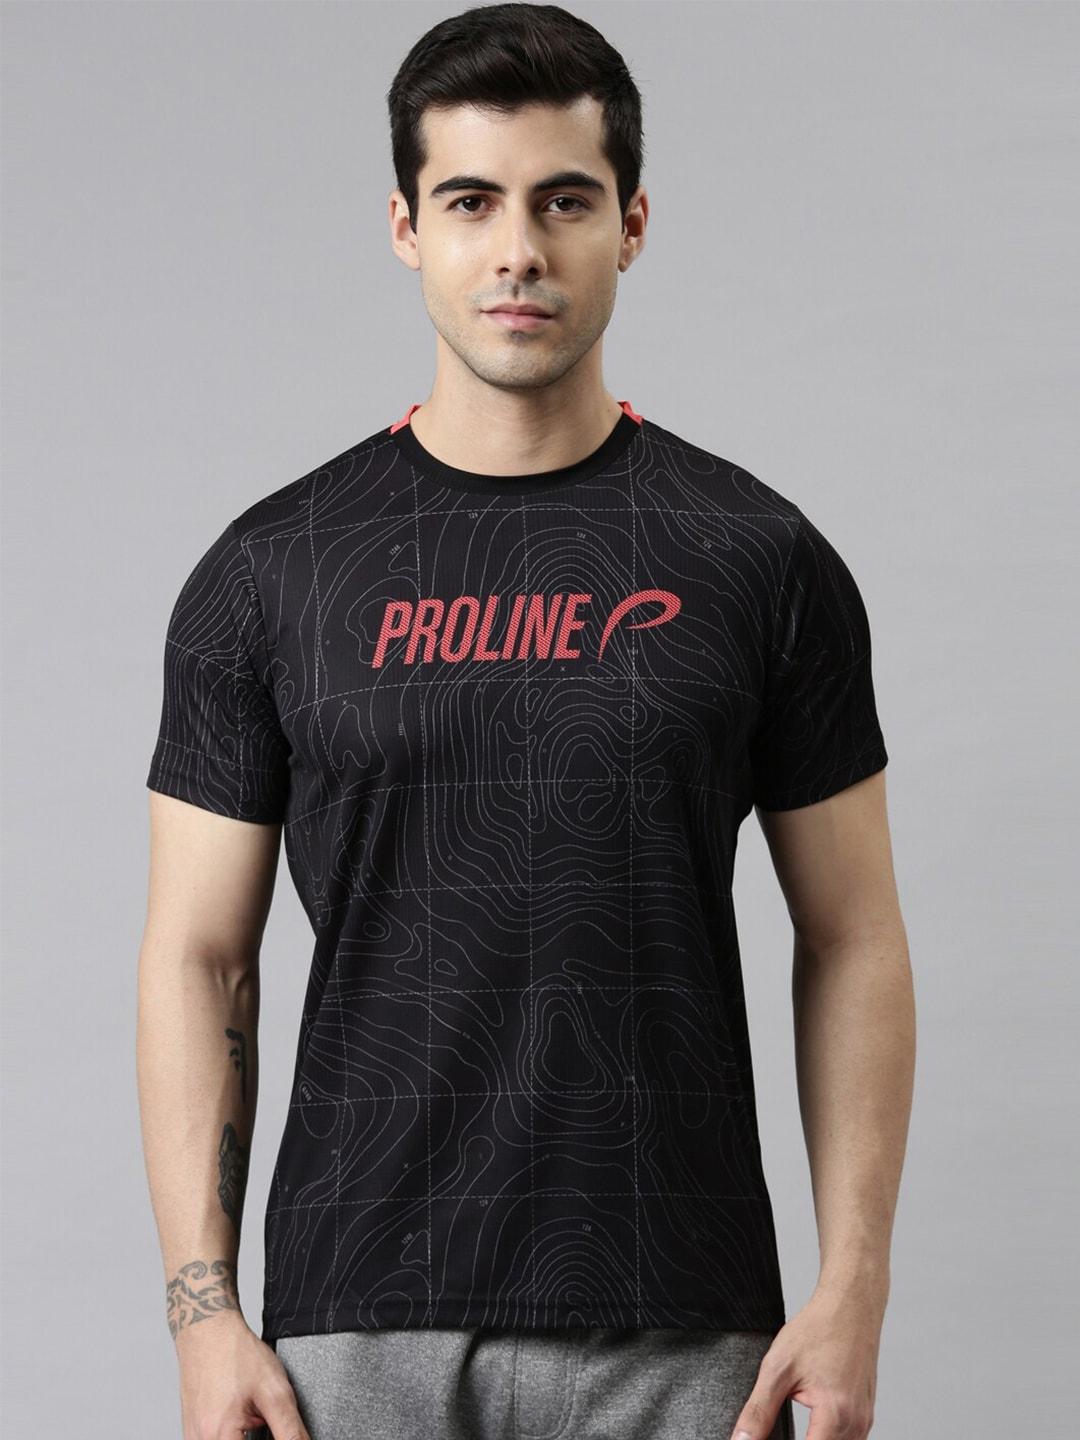 Proline Abstract Printed Cotton T-shirt